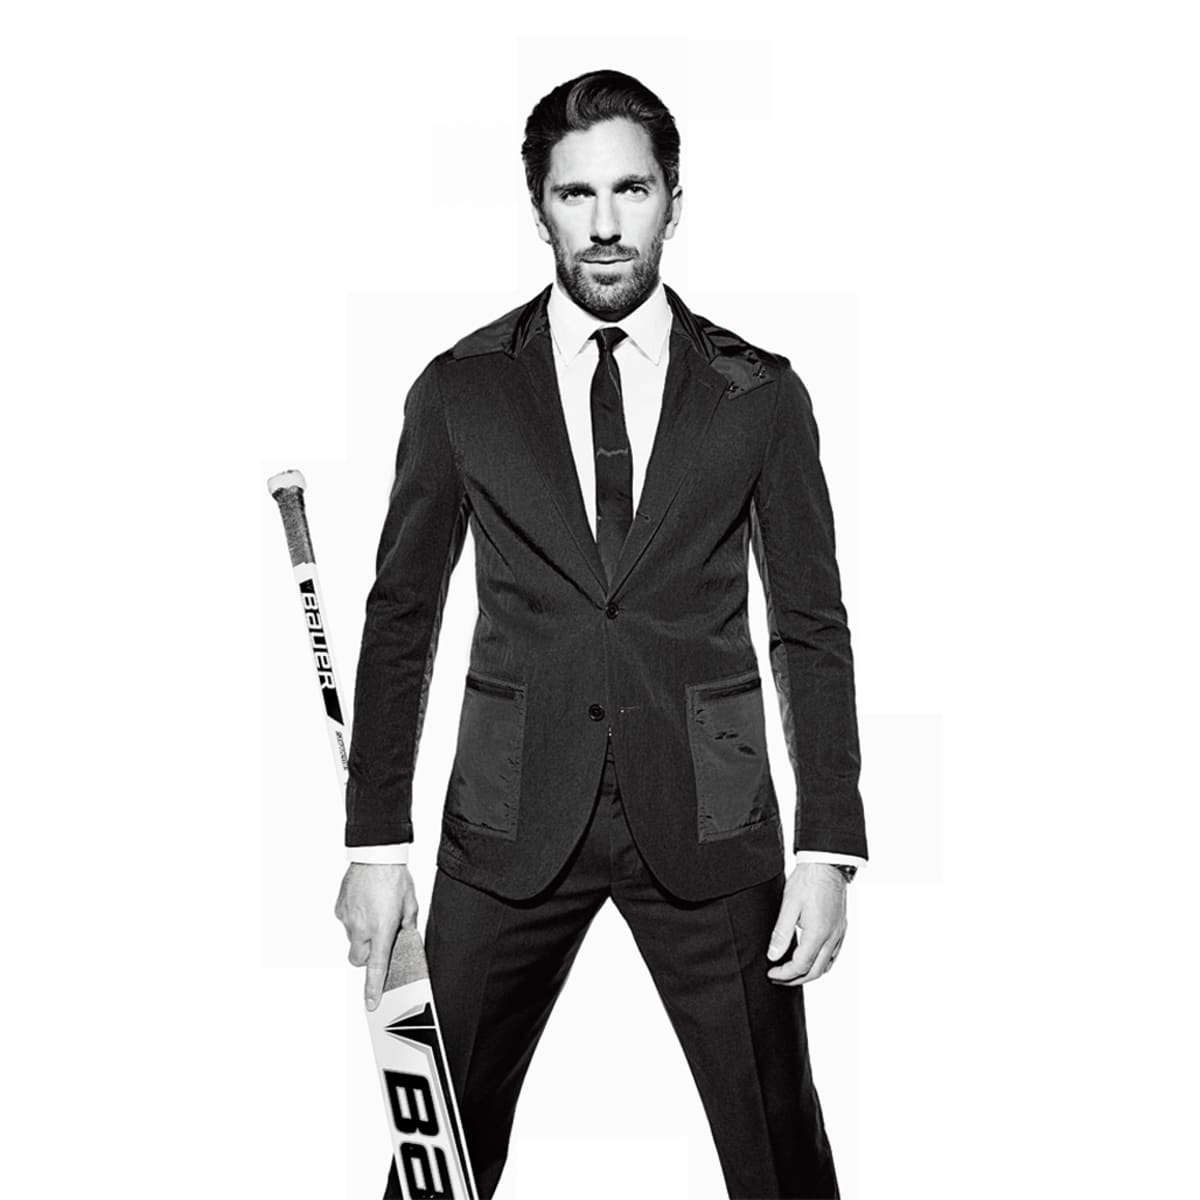 Henrik Lundqvist Interview - The King, On and Off the Ice